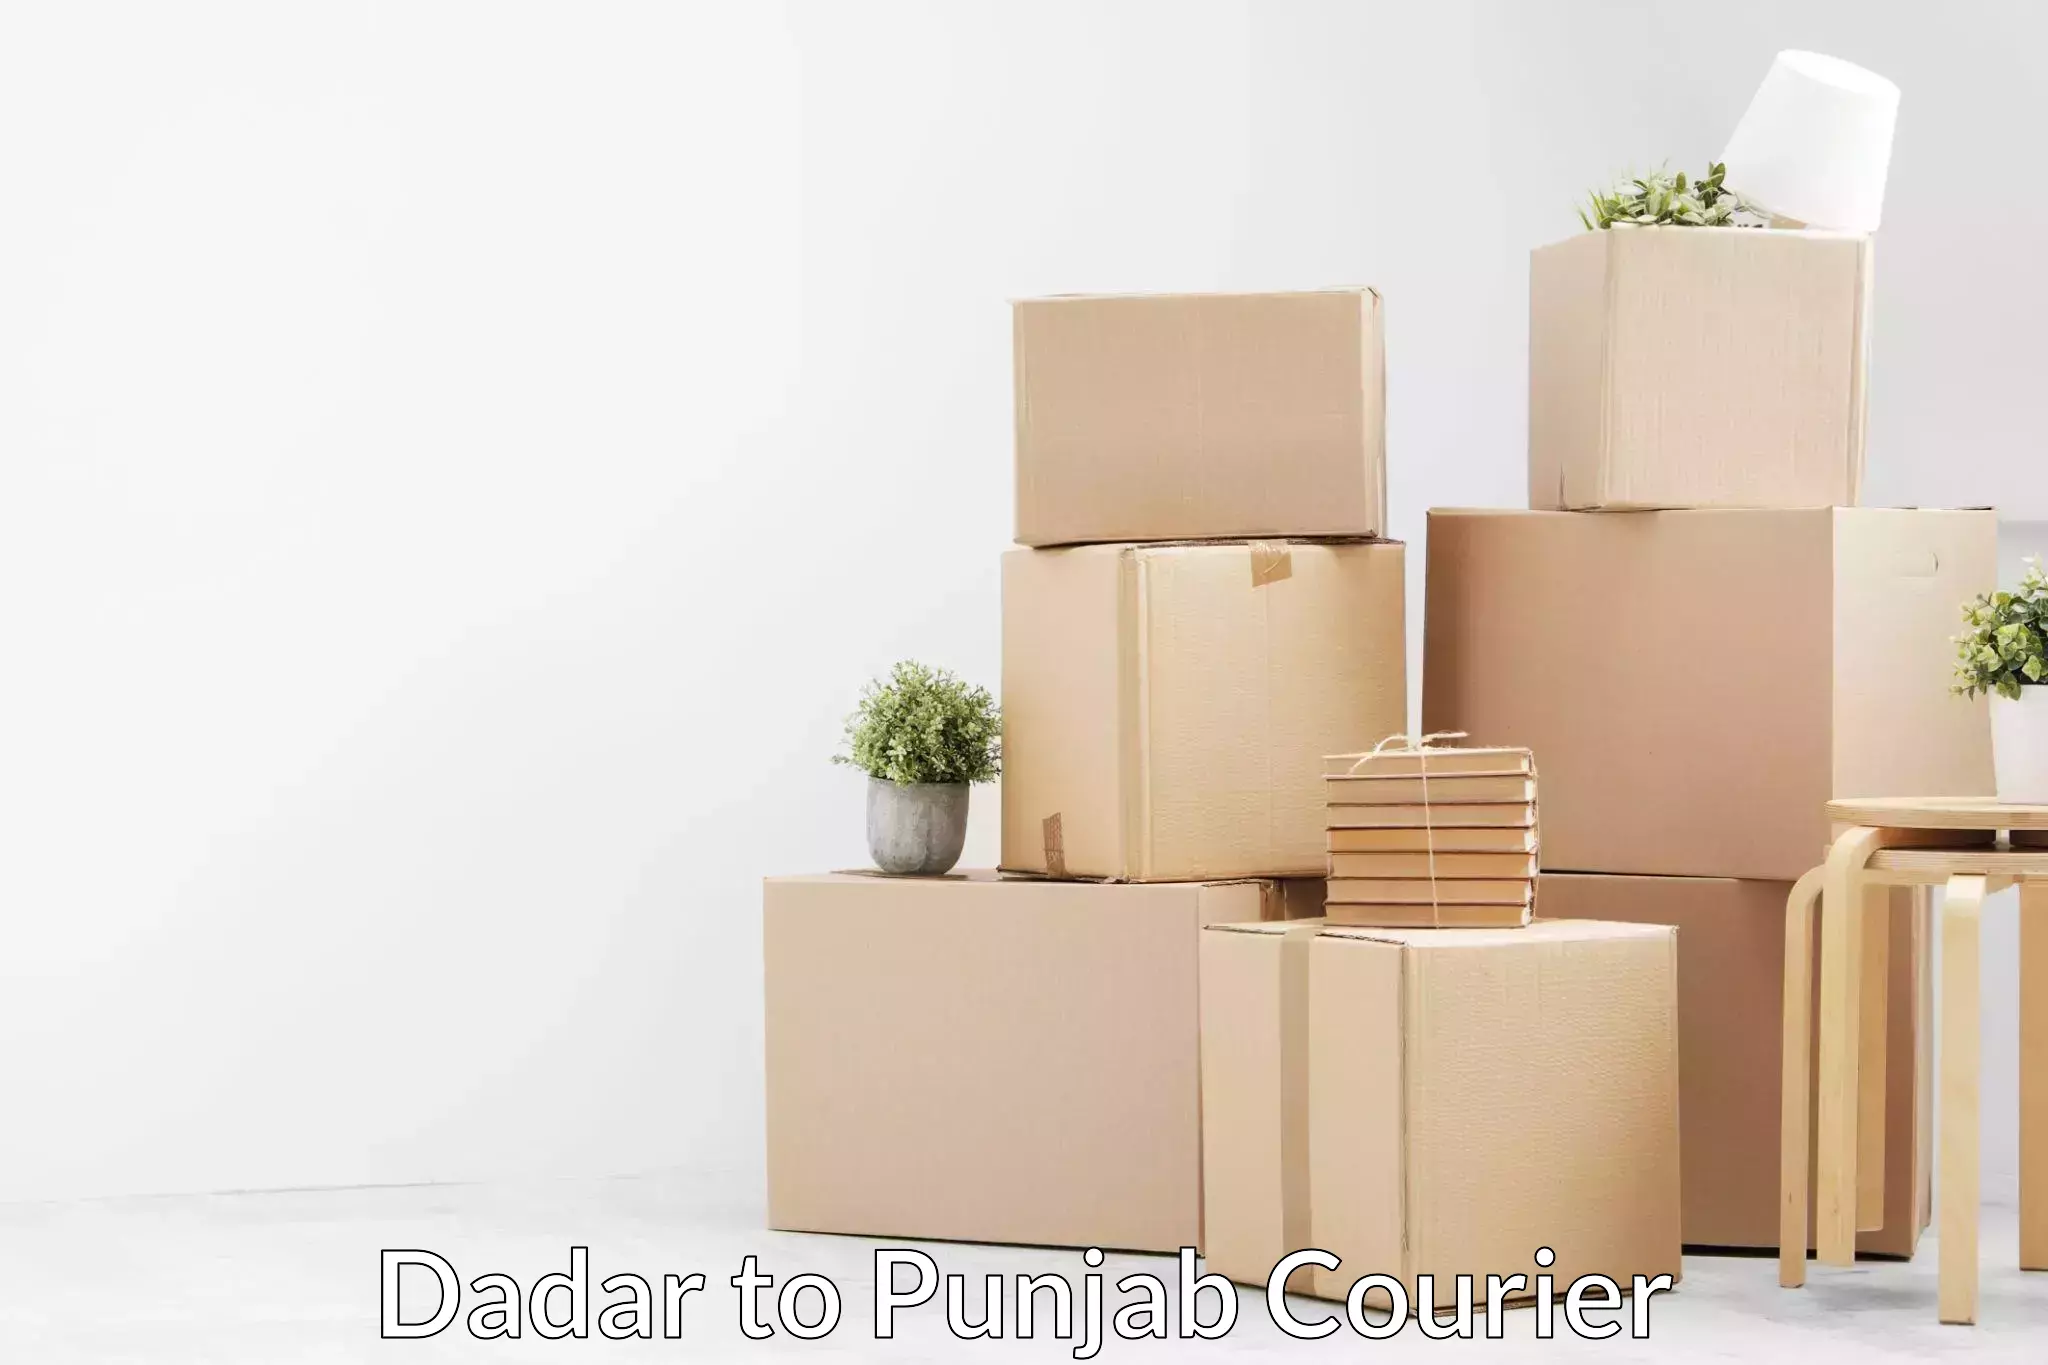 Home moving specialists in Dadar to Zirakpur